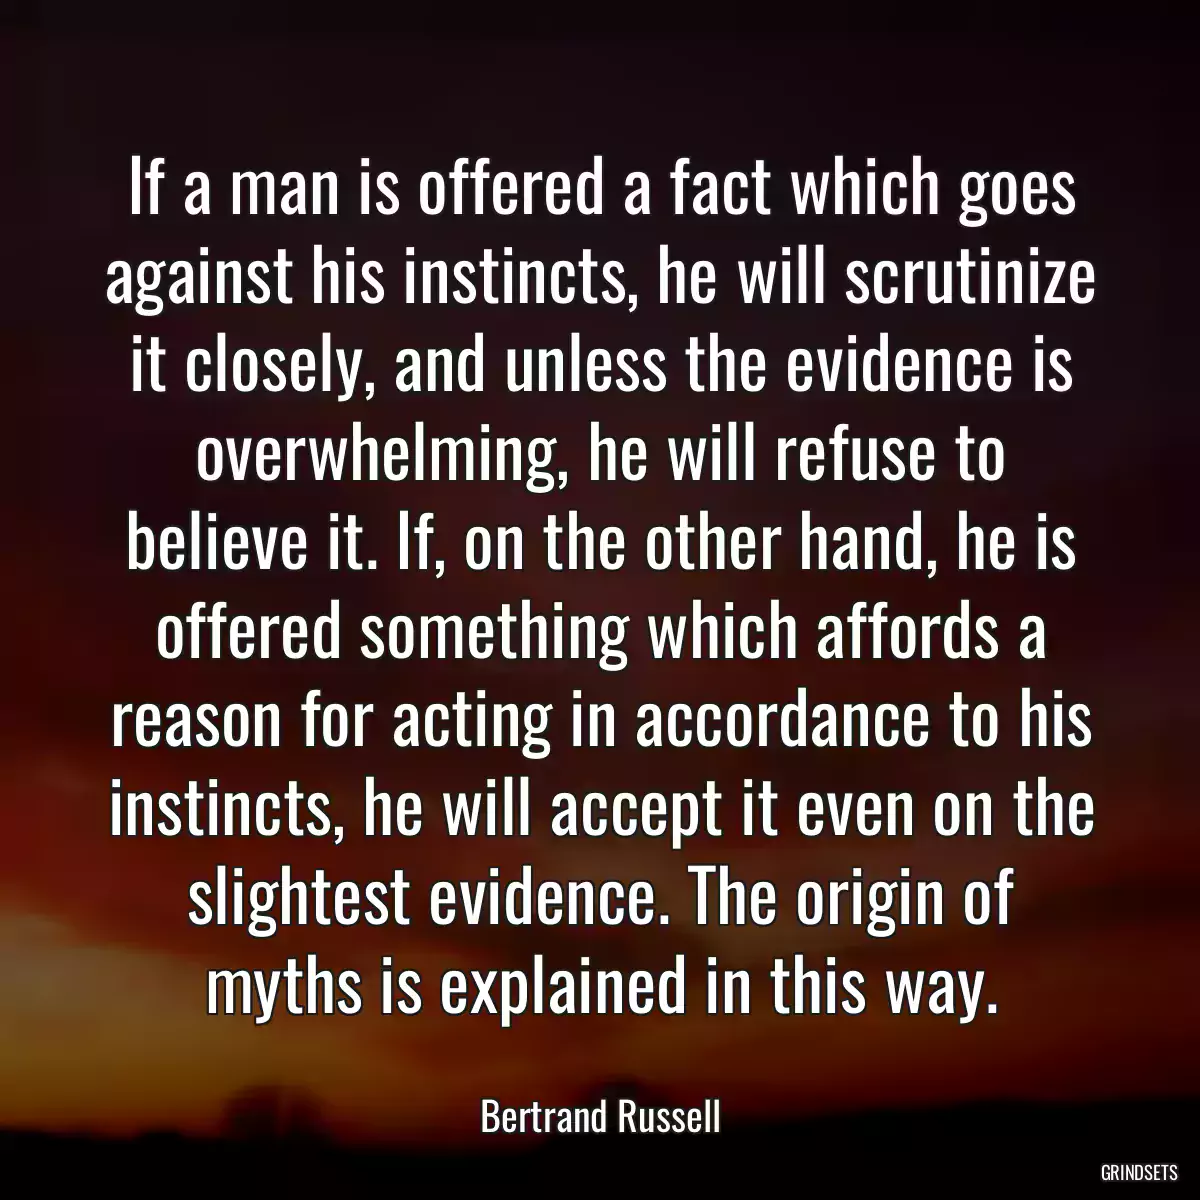 If a man is offered a fact which goes against his instincts, he will scrutinize it closely, and unless the evidence is overwhelming, he will refuse to believe it. If, on the other hand, he is offered something which affords a reason for acting in accordance to his instincts, he will accept it even on the slightest evidence. The origin of myths is explained in this way.